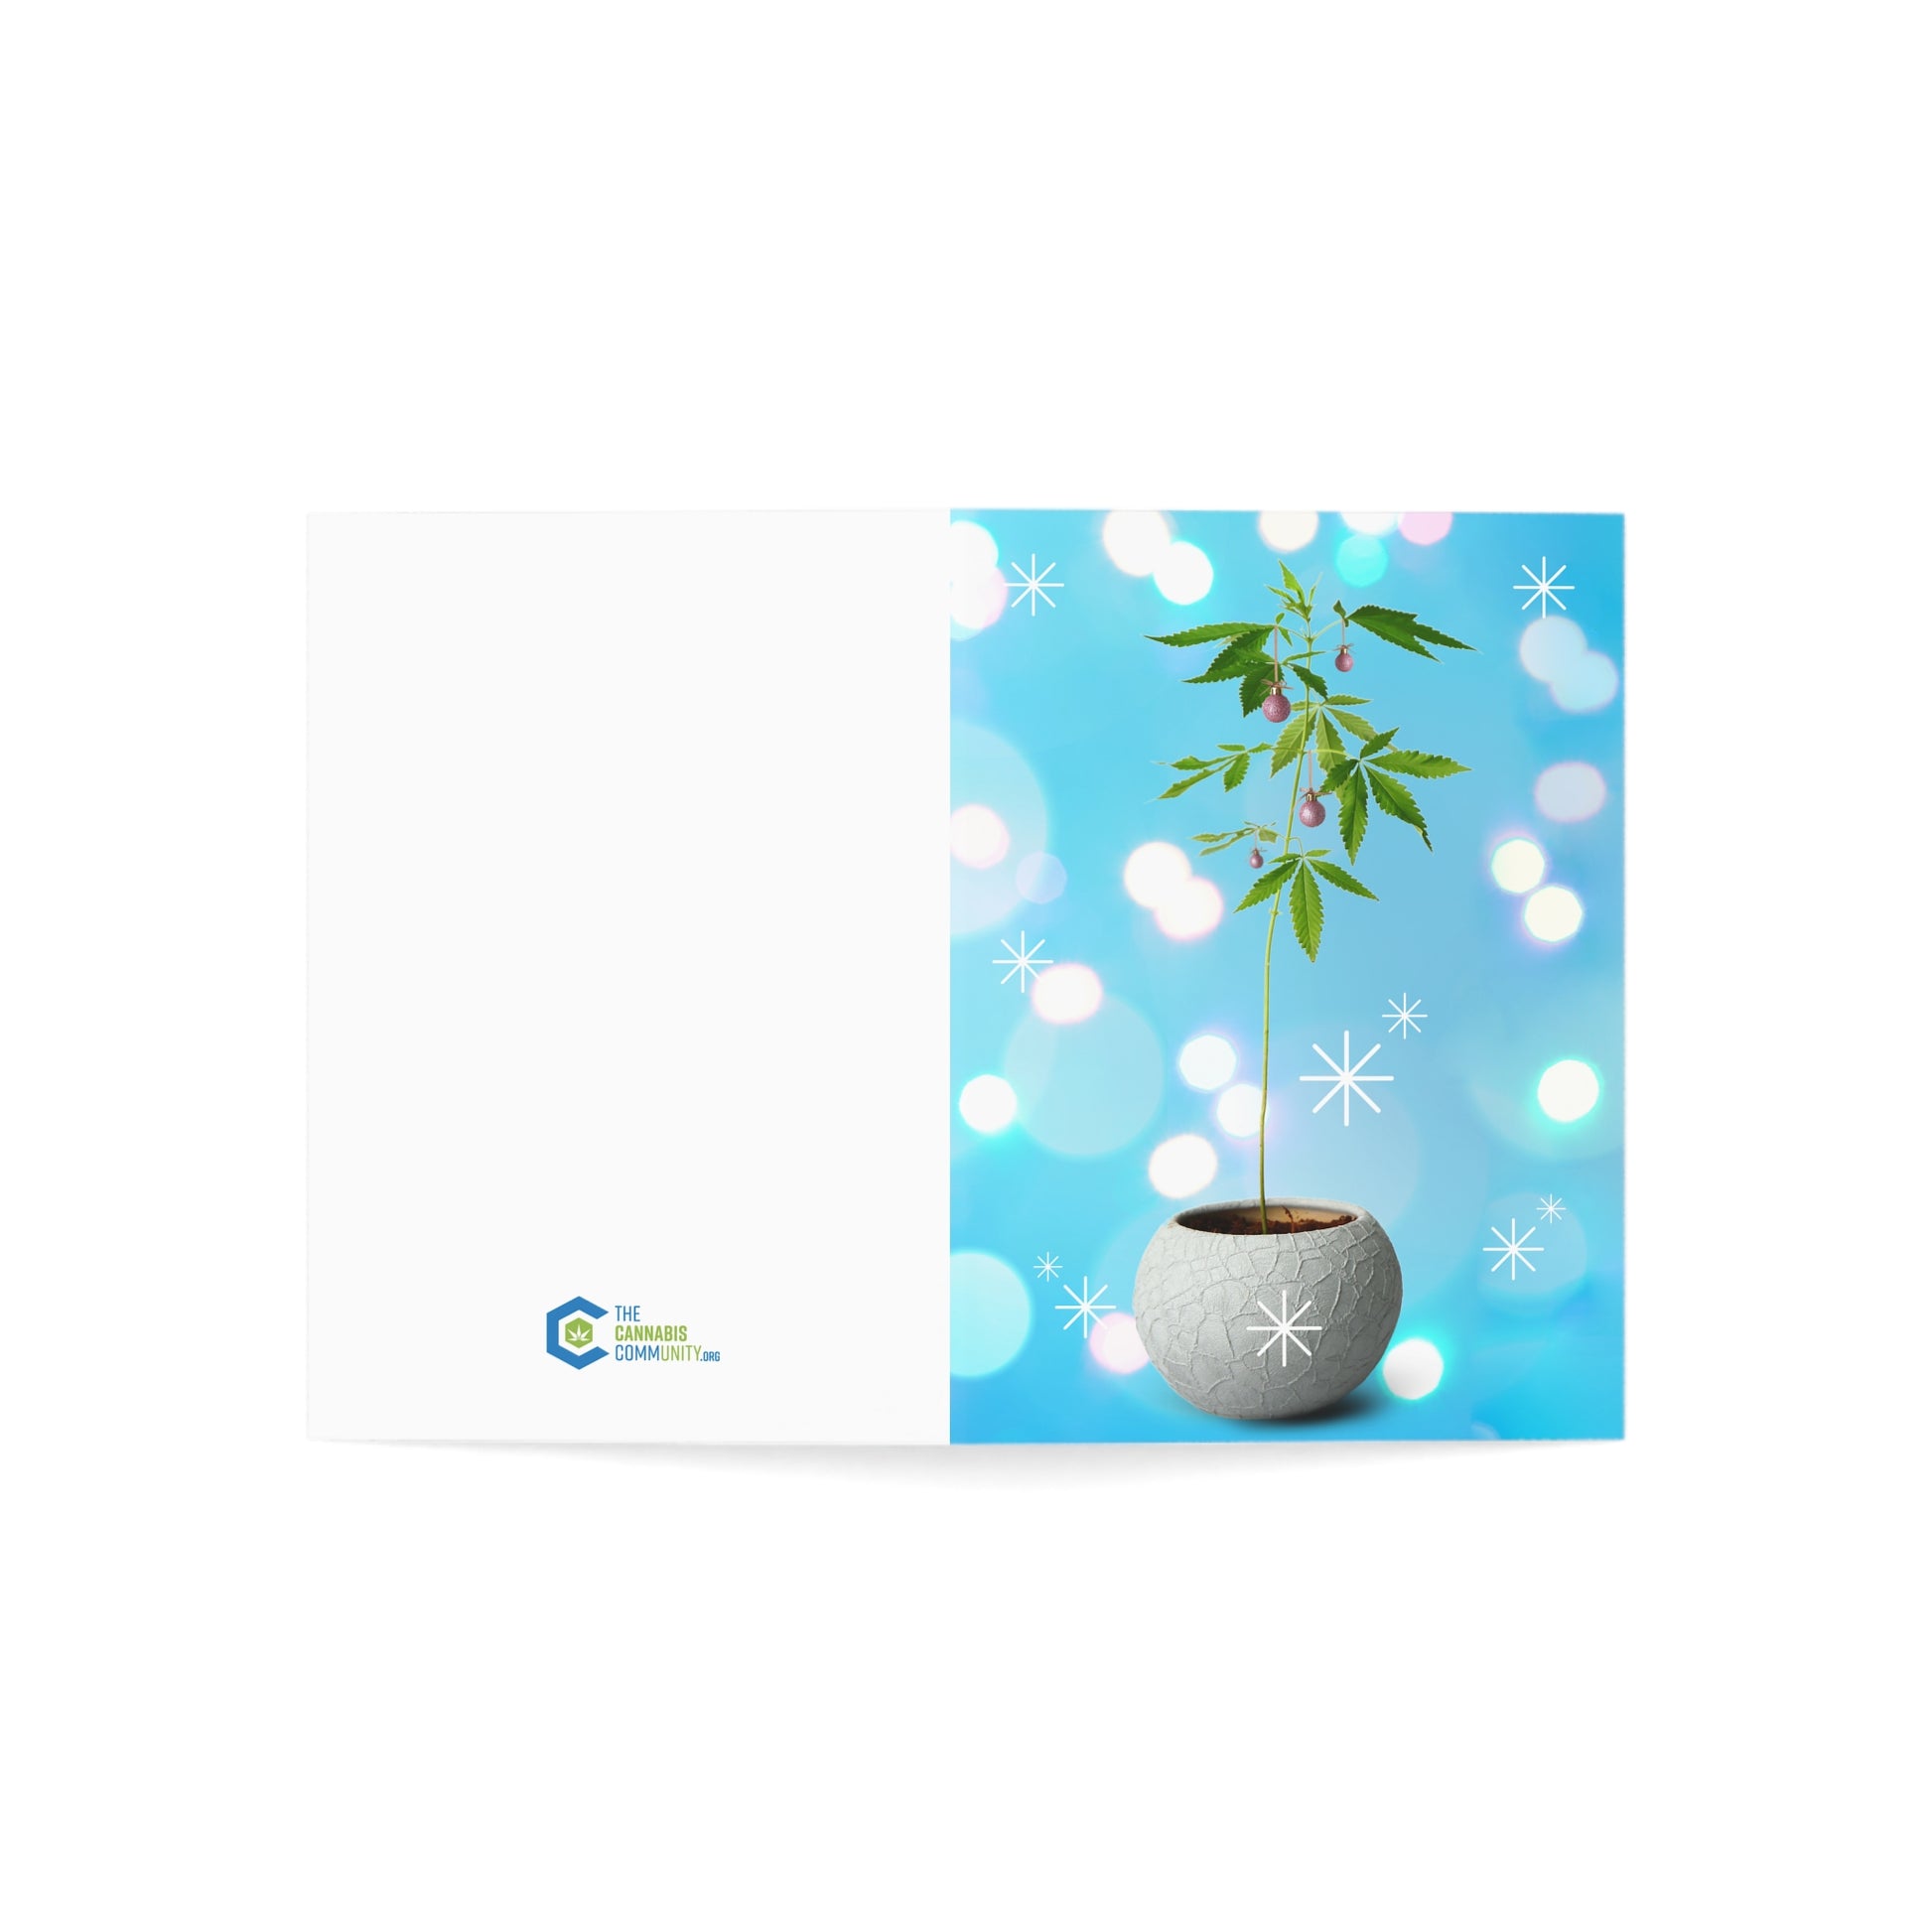 Marketing brochure with a blue cover, featuring a Potted Christmas Marijuana Plant Merry Christmas Greeting Card and white bokeh lights, next to a white space with a company logo on the bottom left, printed on sustainable paper.